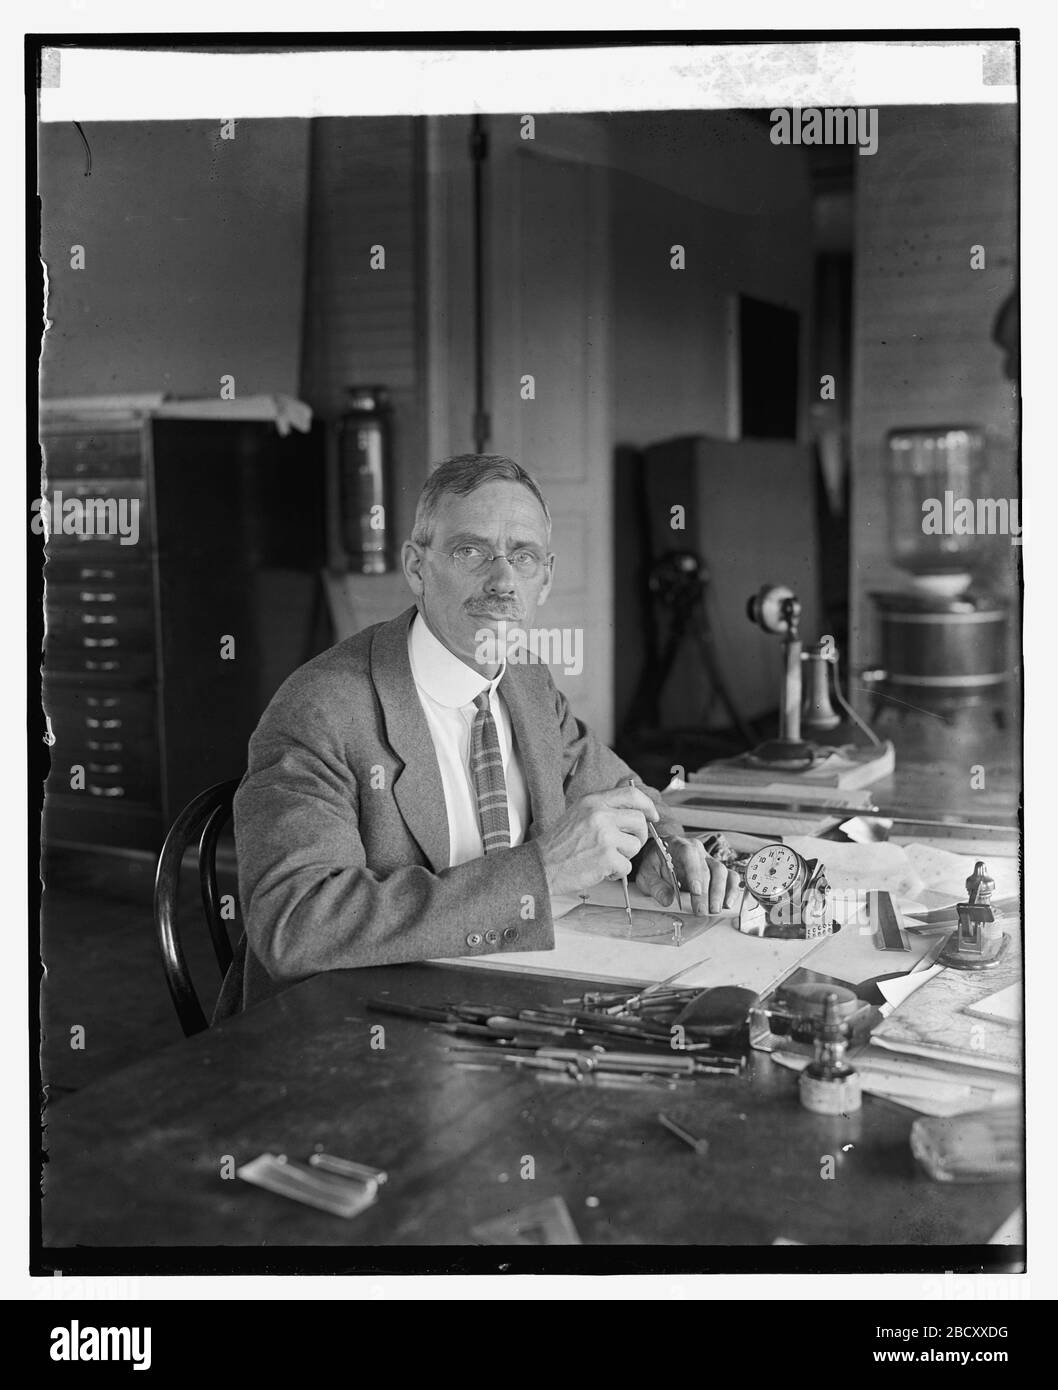 'English: Title: Albert H. Brimstead of Nat'l. Geog. Soc. with 24 hour watch, 6/1/25 Abstract/medium: 1 negative : glass ; 4 x 5 in. or smaller; 1925; Library of Congress Catalog: https://lccn.loc.gov/2016840010 Image download: https://cdn.loc.gov/master/pnp/npcc/13700/13744u.tif Original url: https://www.loc.gov/pictures/item/2016840010/; National Photo Company Collection; ' Stock Photo